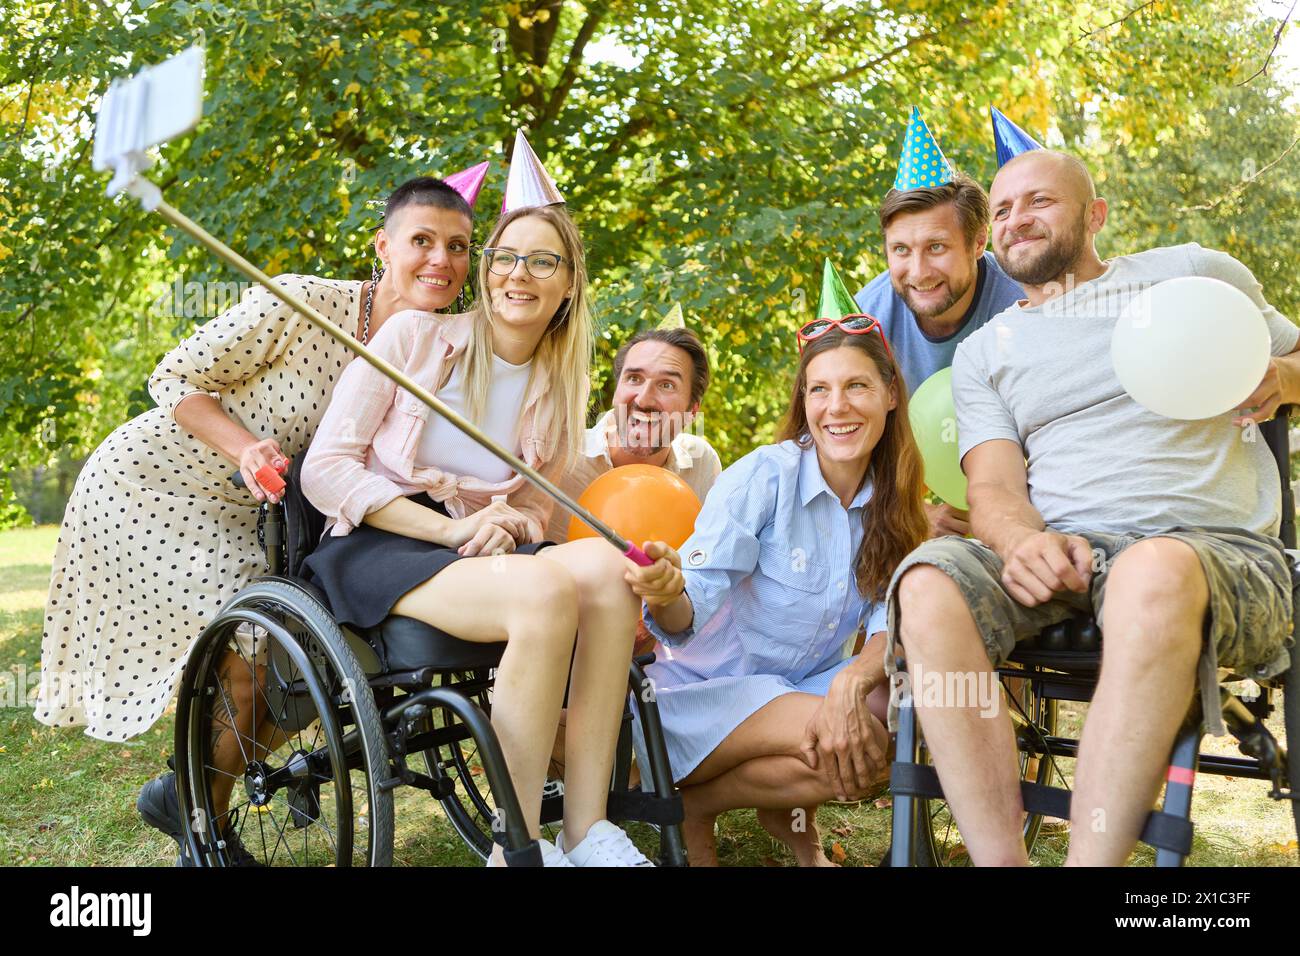 A joyful outdoor celebration featuring a group of friends, including people with disabilities, wearing party hats and enjoying a sunny day. Stock Photo